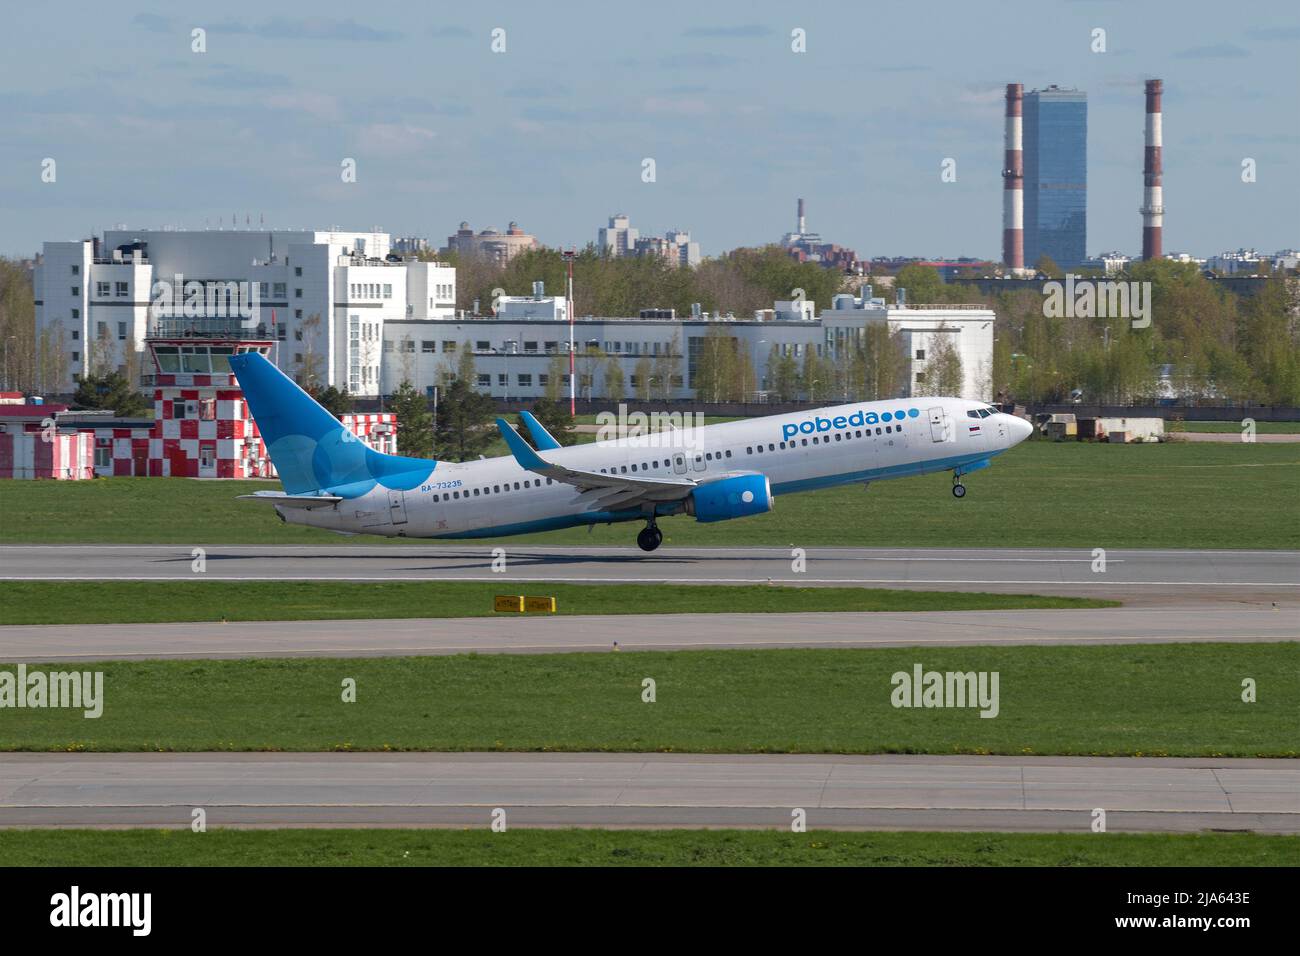 SAINT PETERSBURG, RUSSIA - MAY 20, 2022: Aircraft Boeing 737-800 (RA-73235) of Pobeda Airlines on takeoff on a May morning Stock Photo